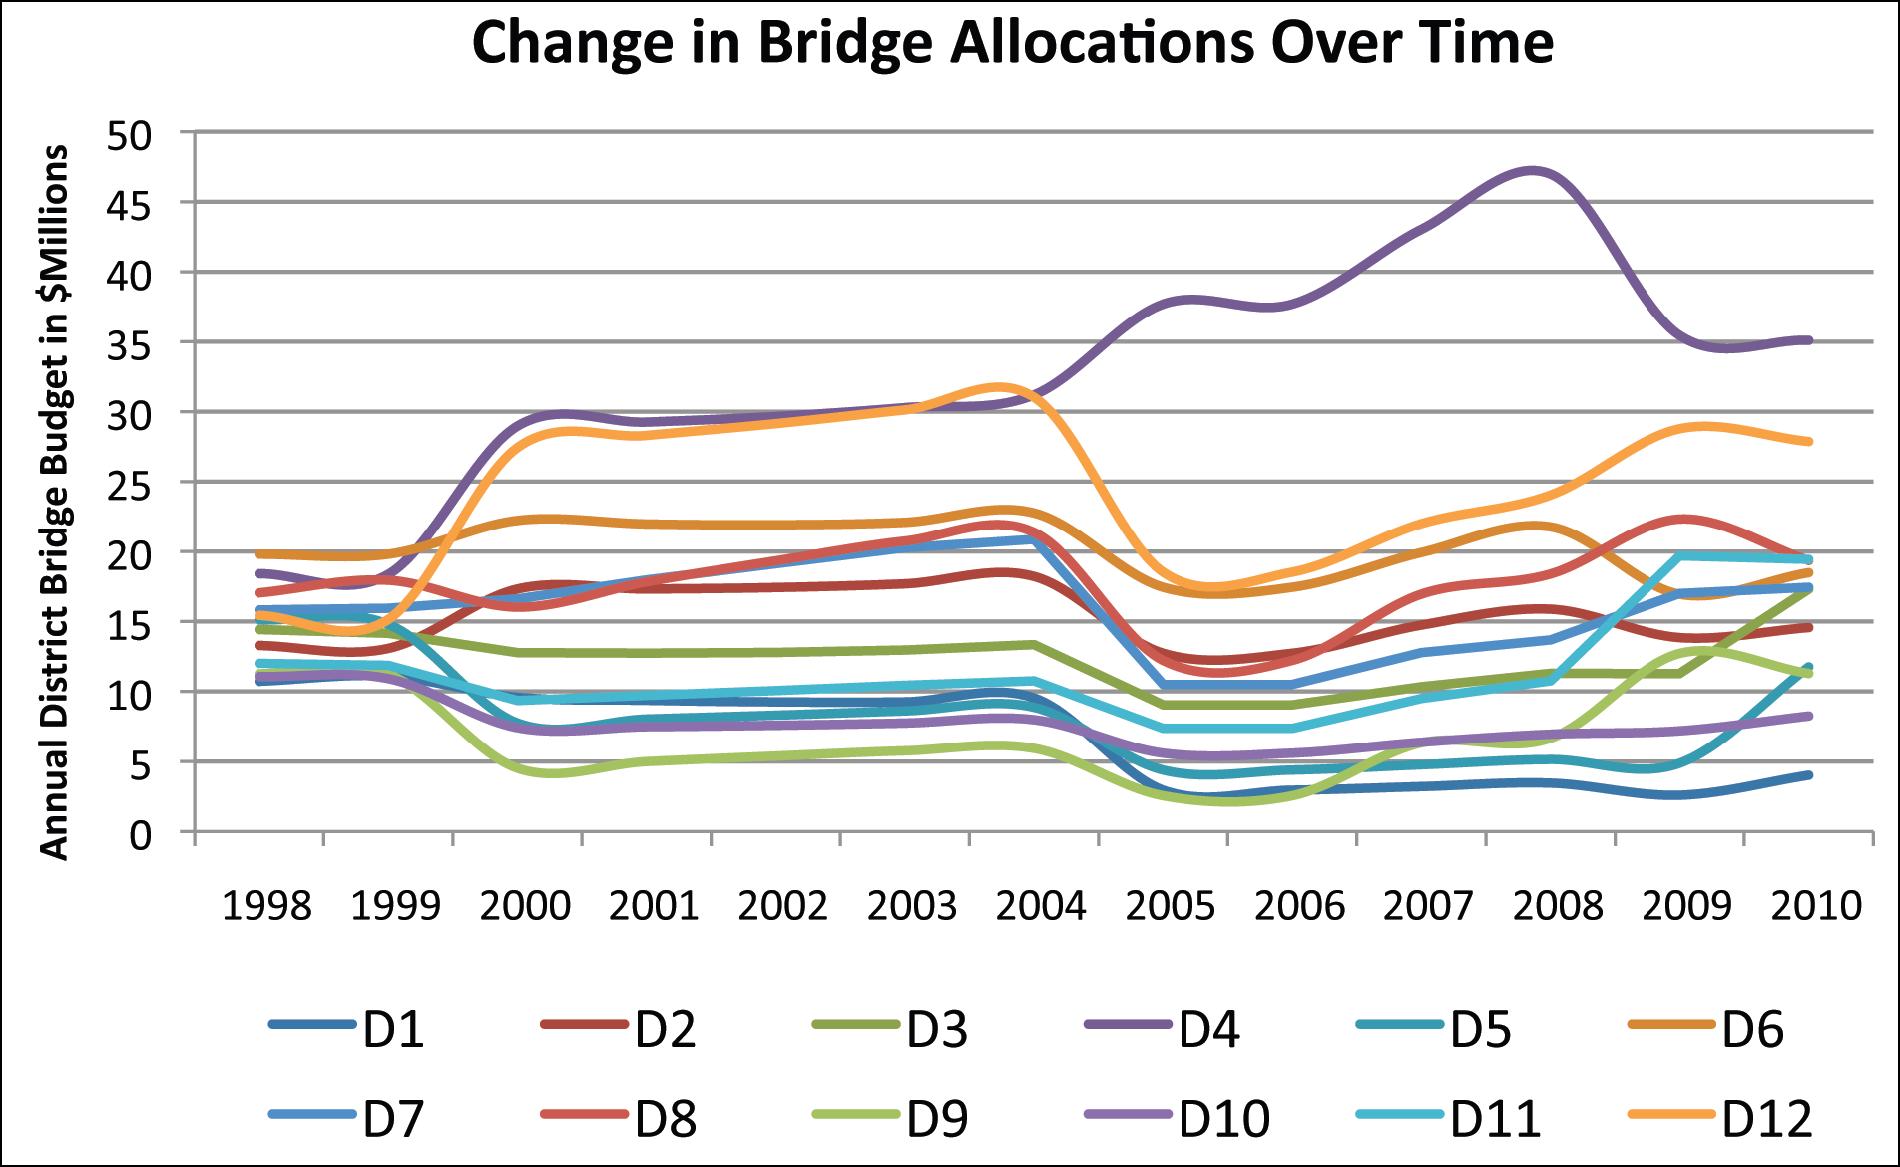 Figure 40 shows 12 tendlines from 1998 to 2010. Each trend line illustrates the bridge budgets for one of the 12 ODOT districts.  The lines show considerable shifting with bridge budgets increasing over time in six districts and decreasing in six others. The shifts were attributable to the department shifting budgets to areas of greatest need as it sought to improve bridge conditions statewide and to bring each district up to the statewide target.  